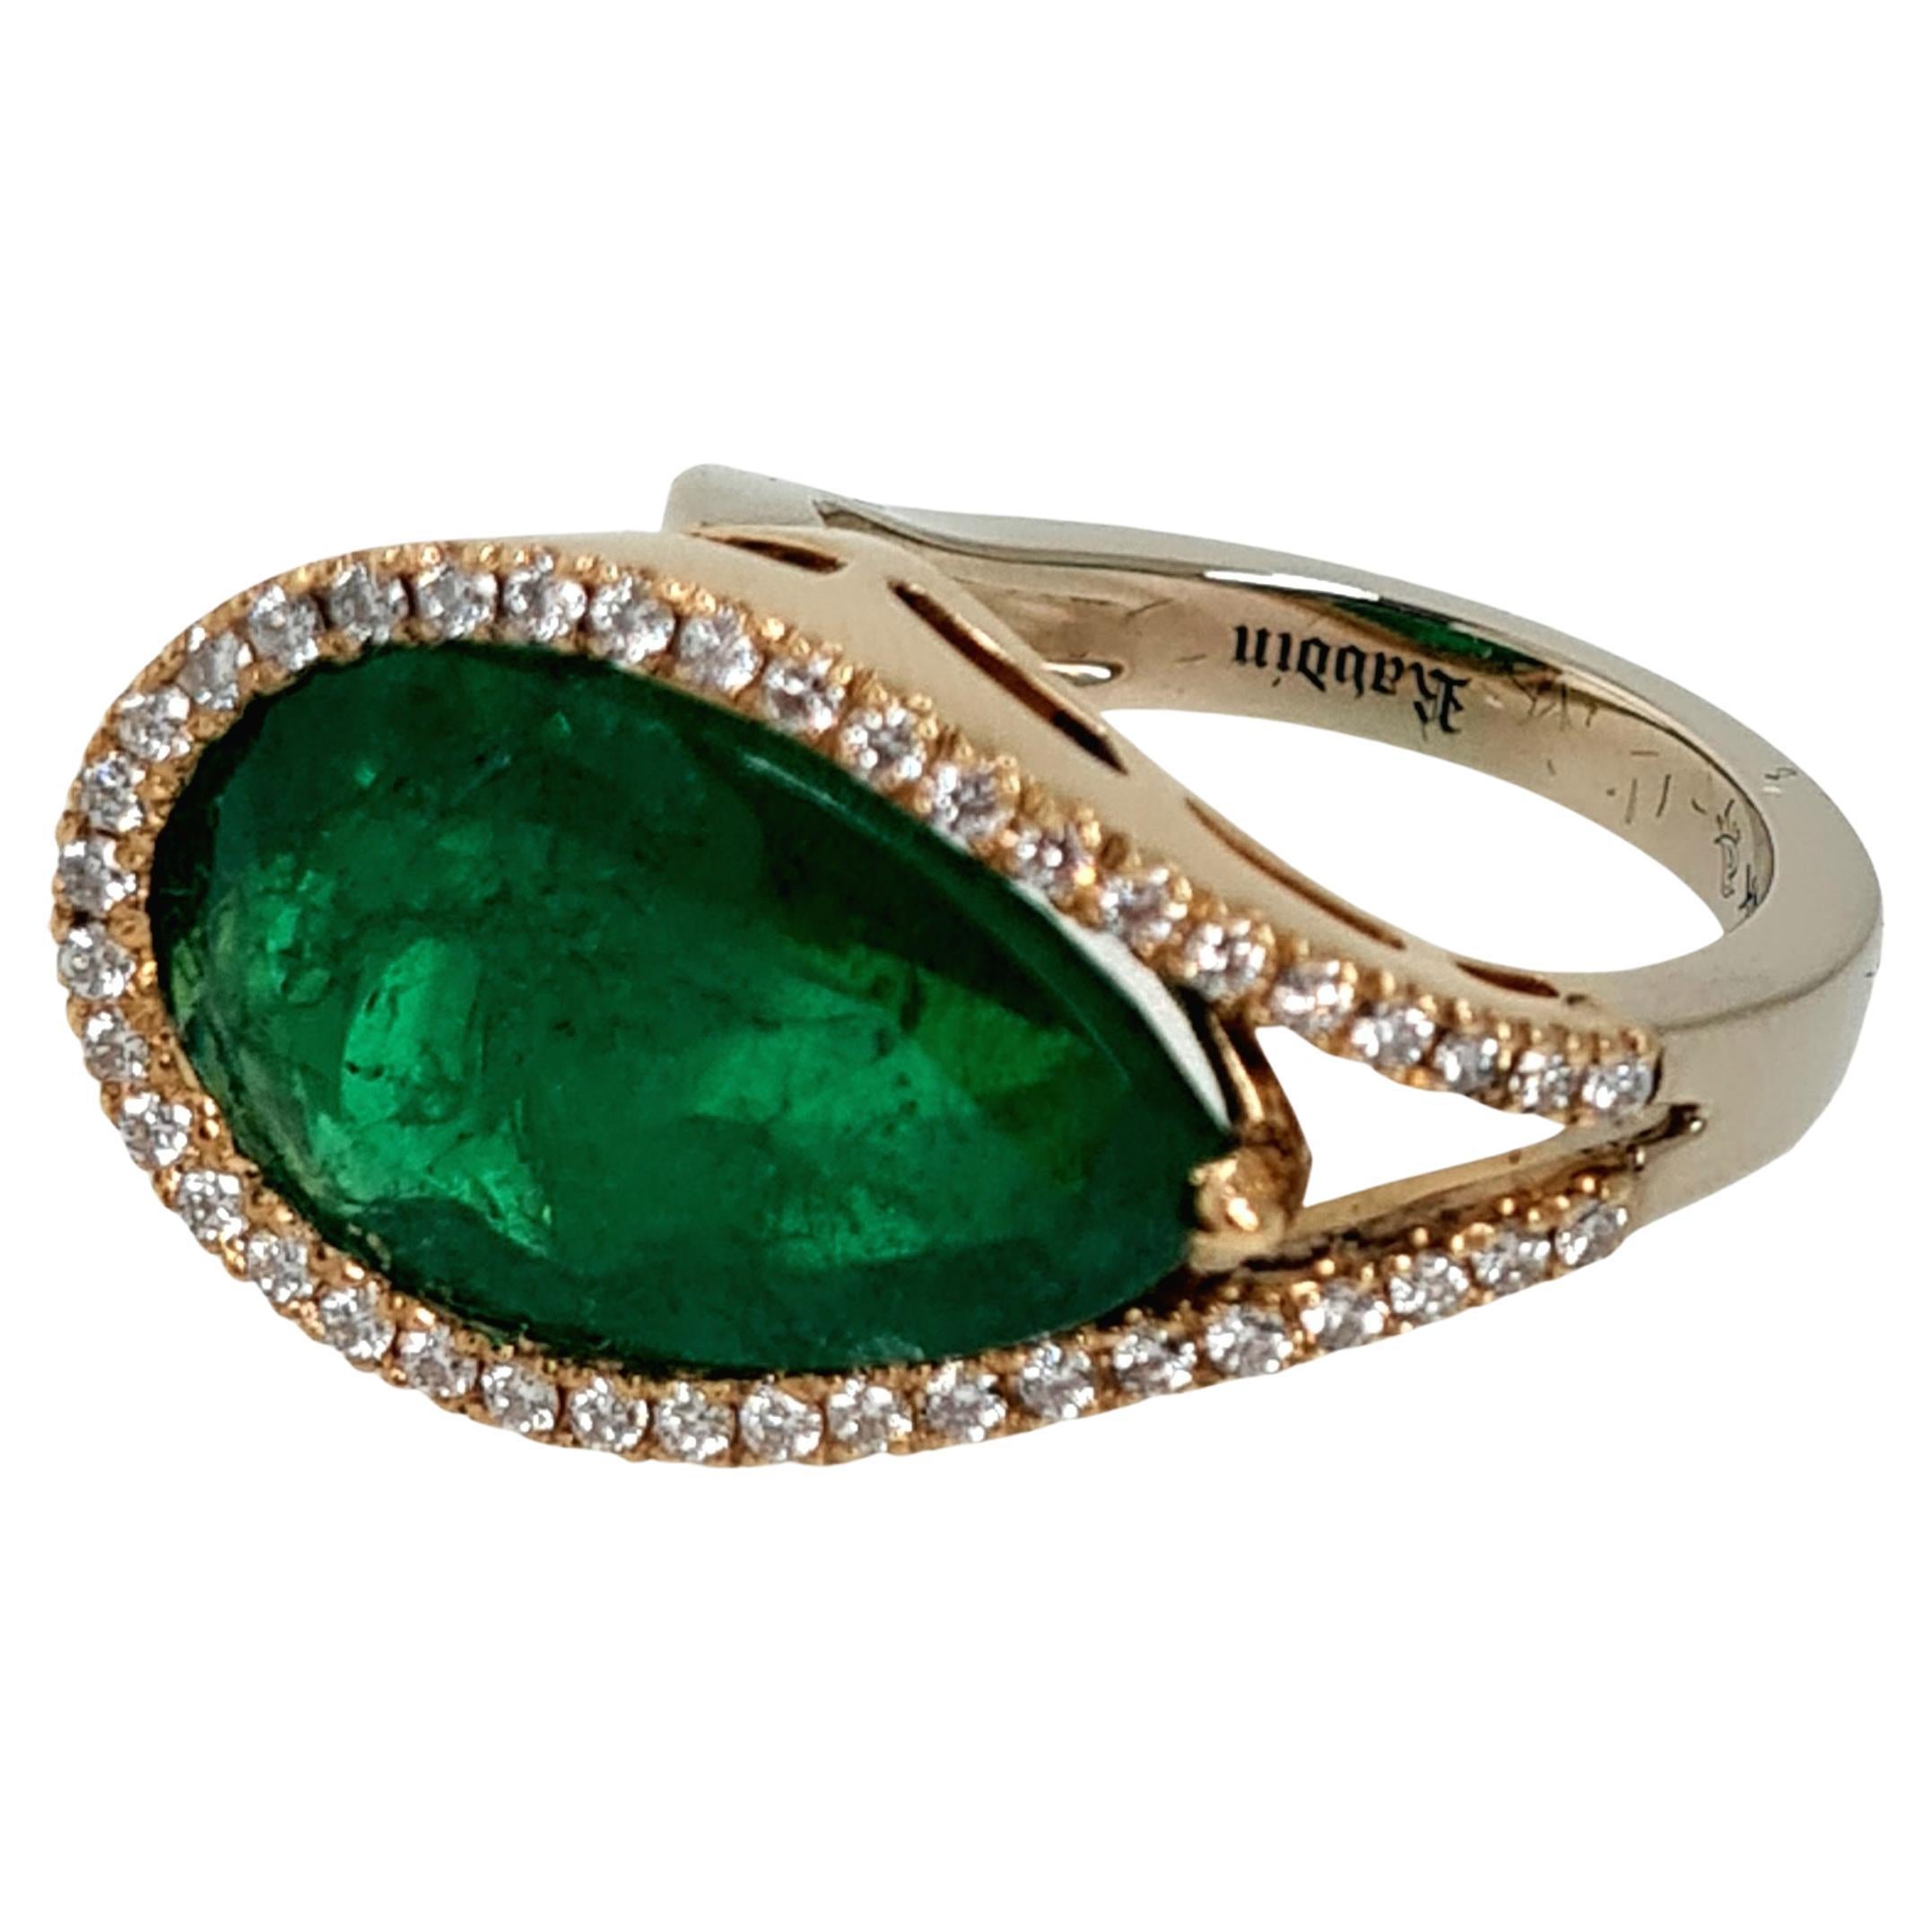 The center stone is a GIA certified 8.71 ct Columbian Pear Cut. This stone is extremely rare, and i have never seen a Columbian Emerald in this size and richness in color. This stone is accompanied with a designer ring by RAVDIN; a Florida-based